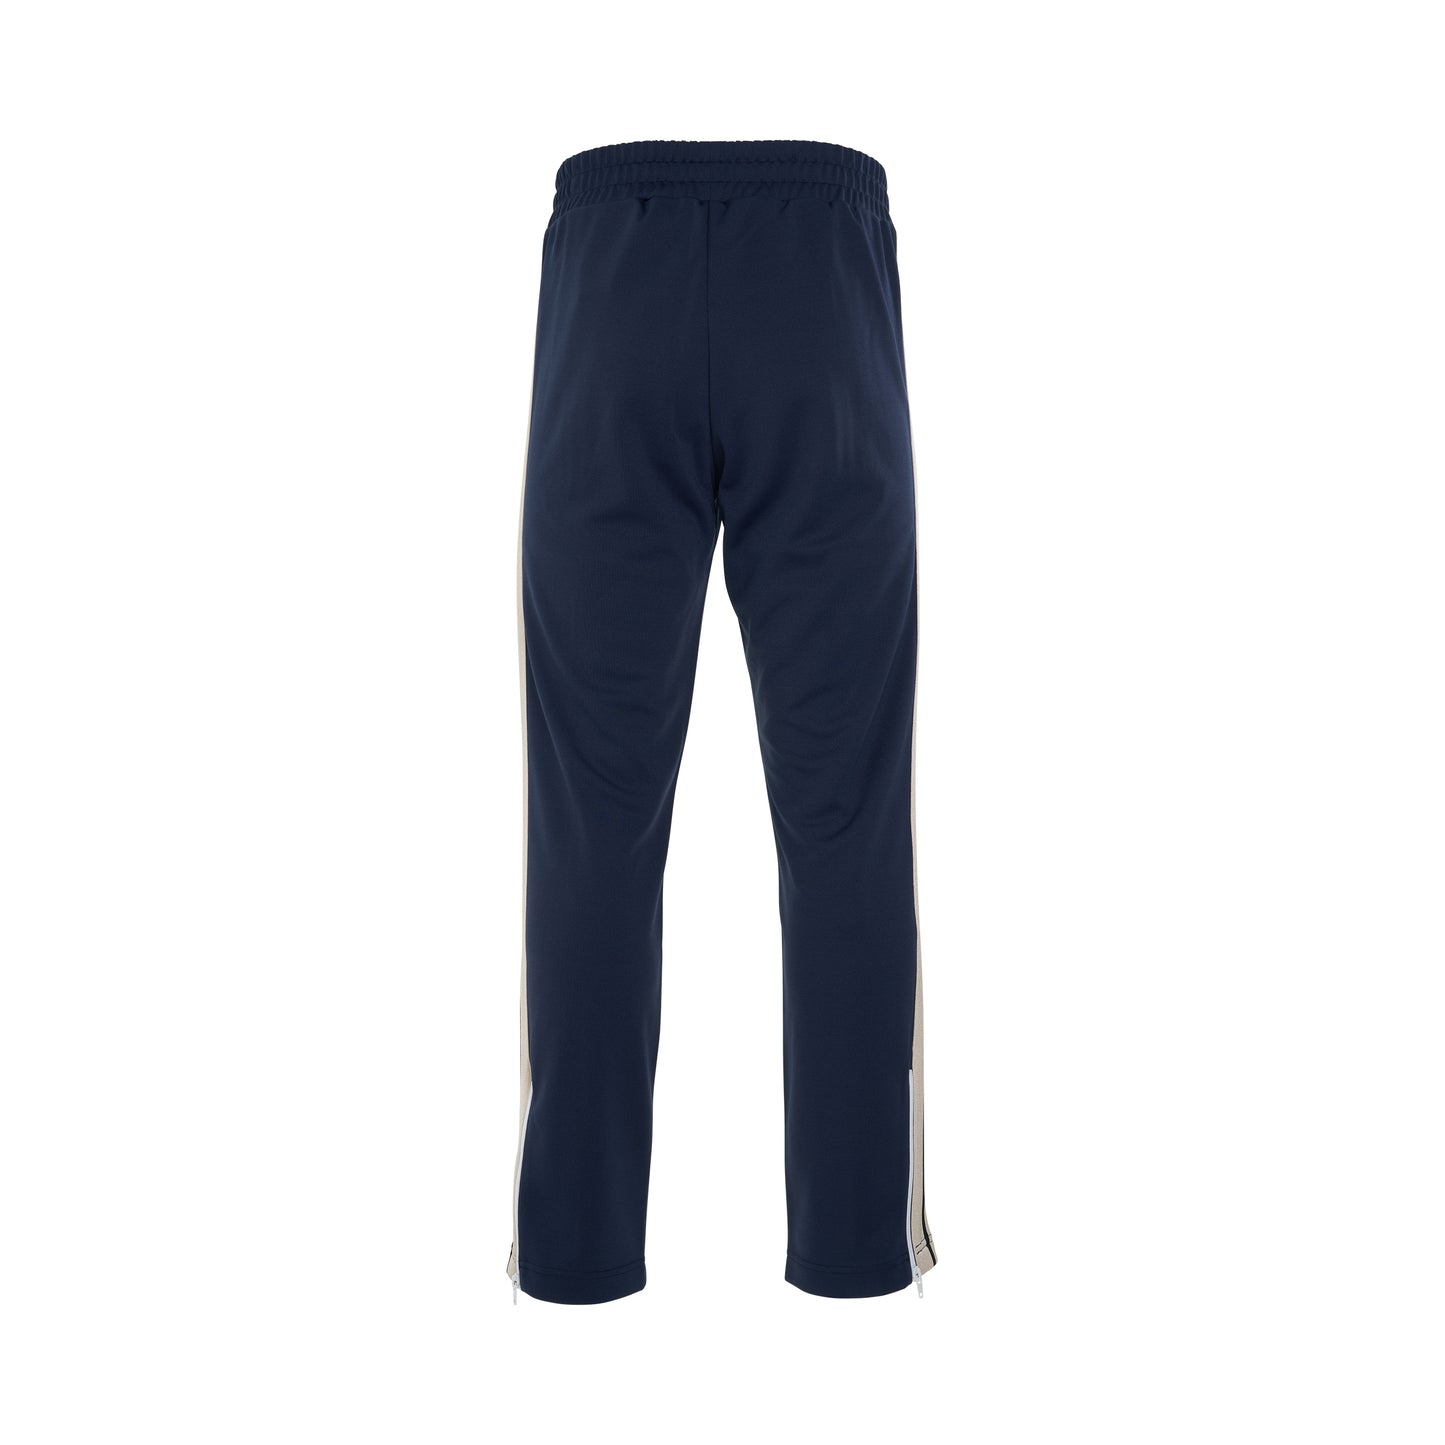 Classic Track Pants in Navy